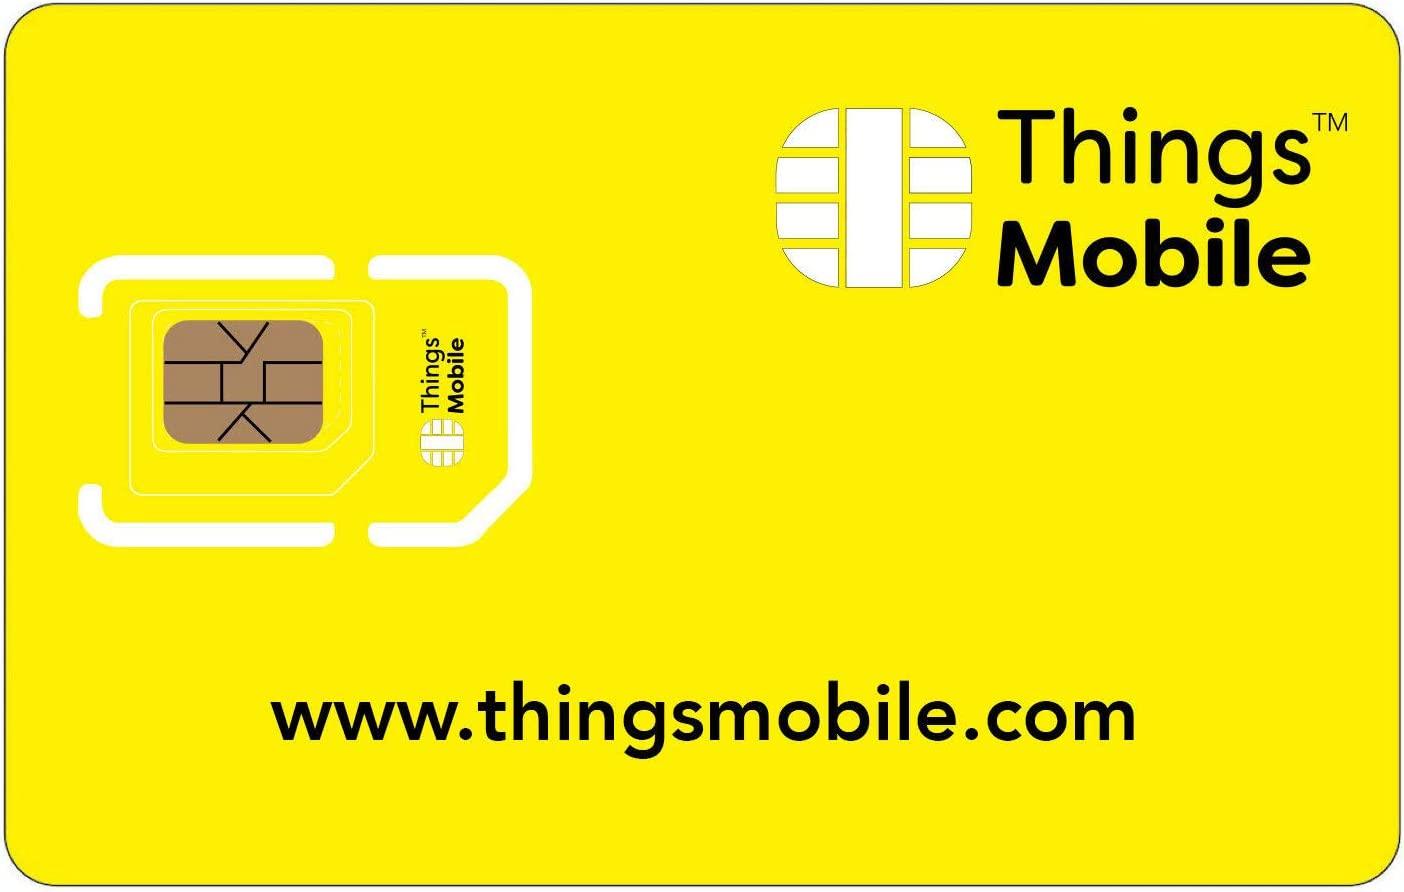 SIM card IoT e M2M Things Mobile (All-In-One) con 10€ di credito incluso - SIM card IoT e M2M Things Mobile (All-In-One) con 10€ di credito incluso - Rivivonet